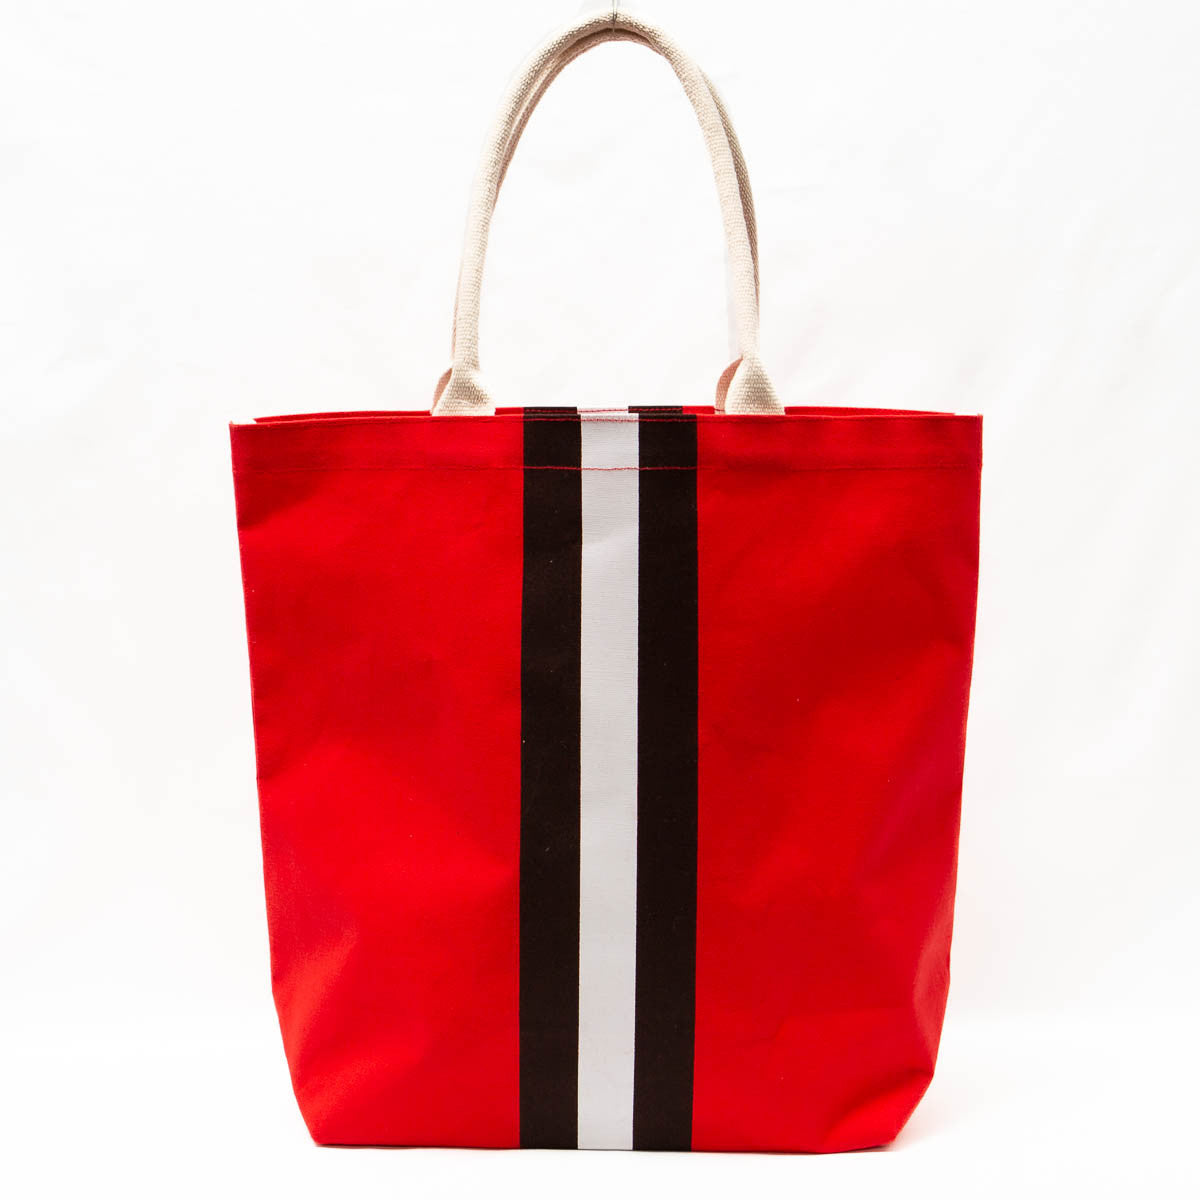 Campus Stripe Tote in Red & Black - Southern Grace Creations